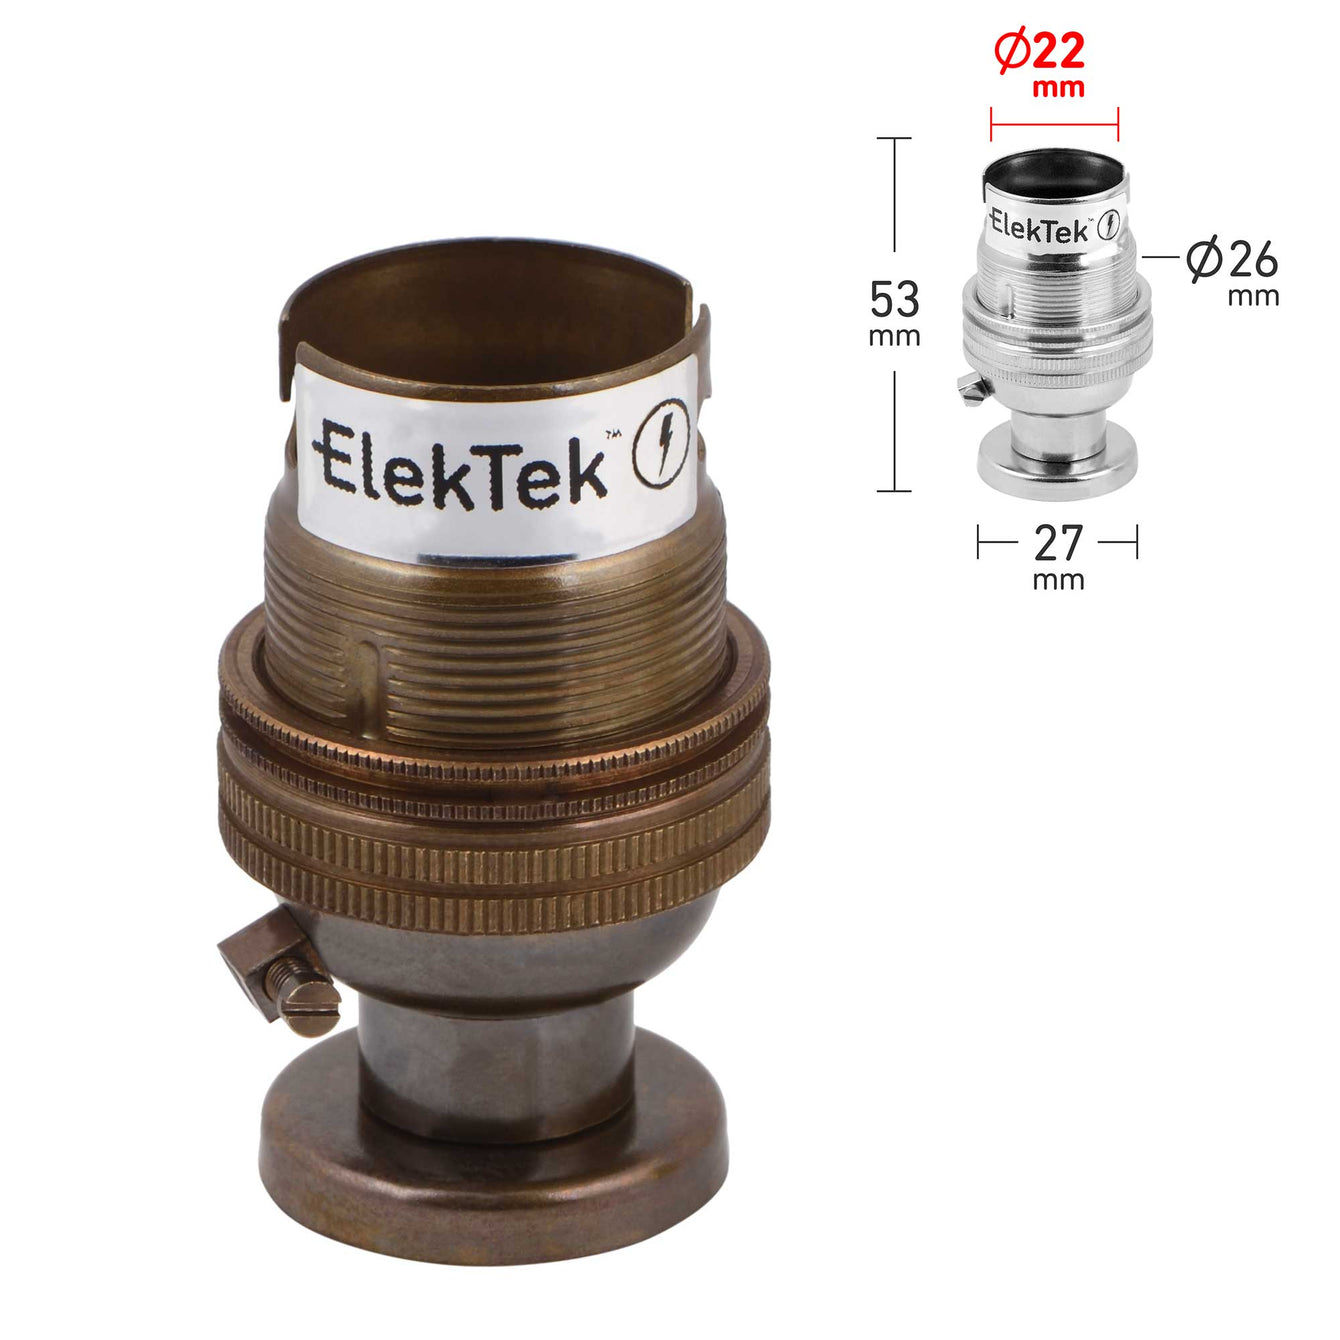 ElekTek Lamp Holder Half Inch Bayonet Cap B22 Unswitched With Shade Ring Back Plate Cover and Screws Solid Brass - Buy It Better 